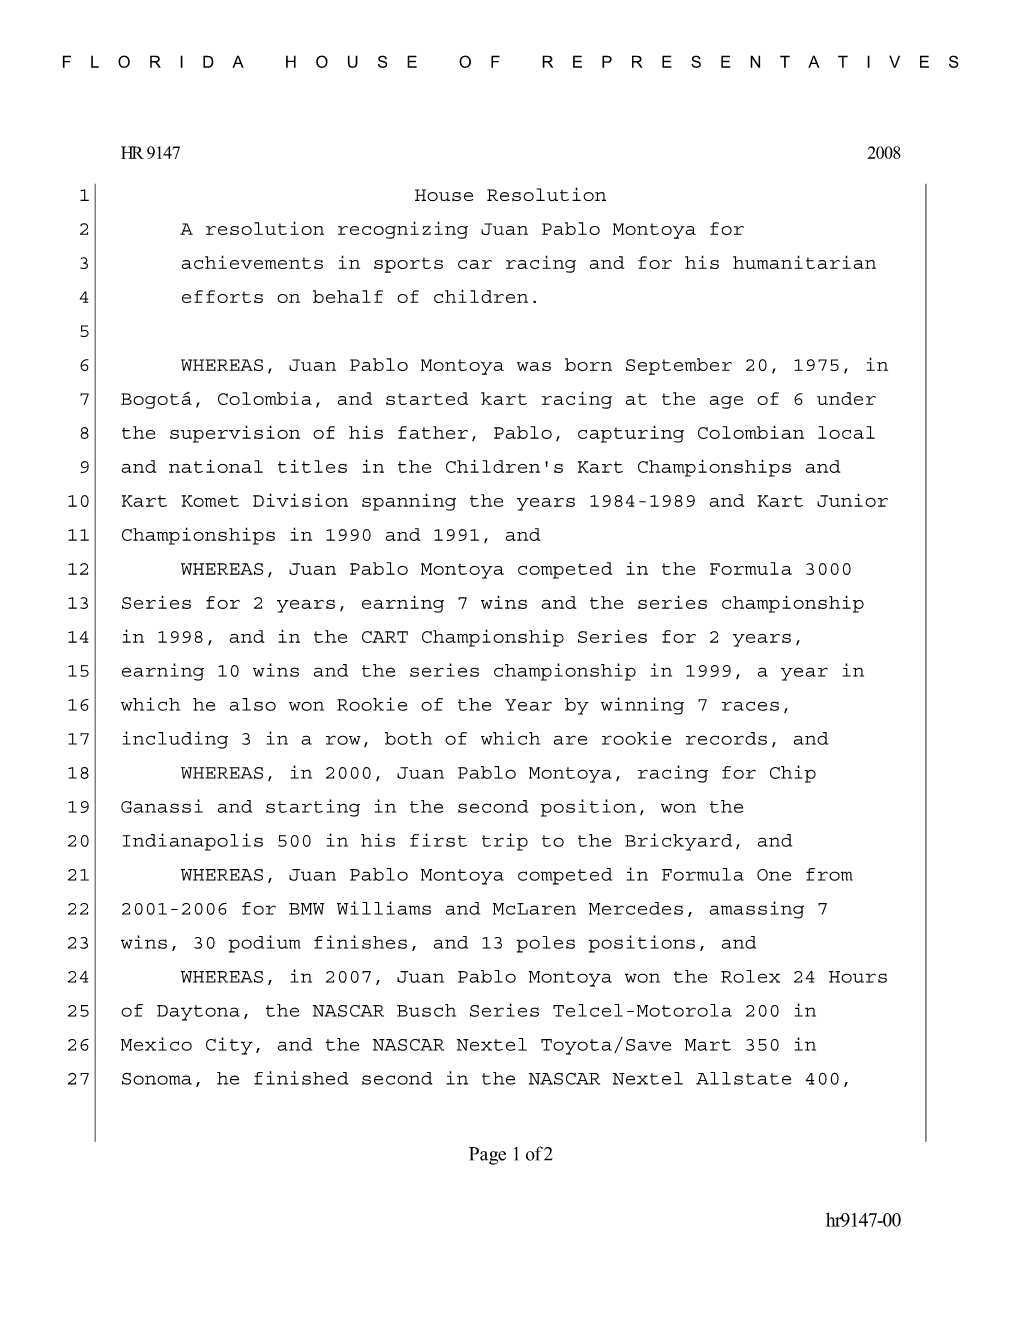 Hr9147-00 Page 1 of 2 House Resolution 1 a Resolution